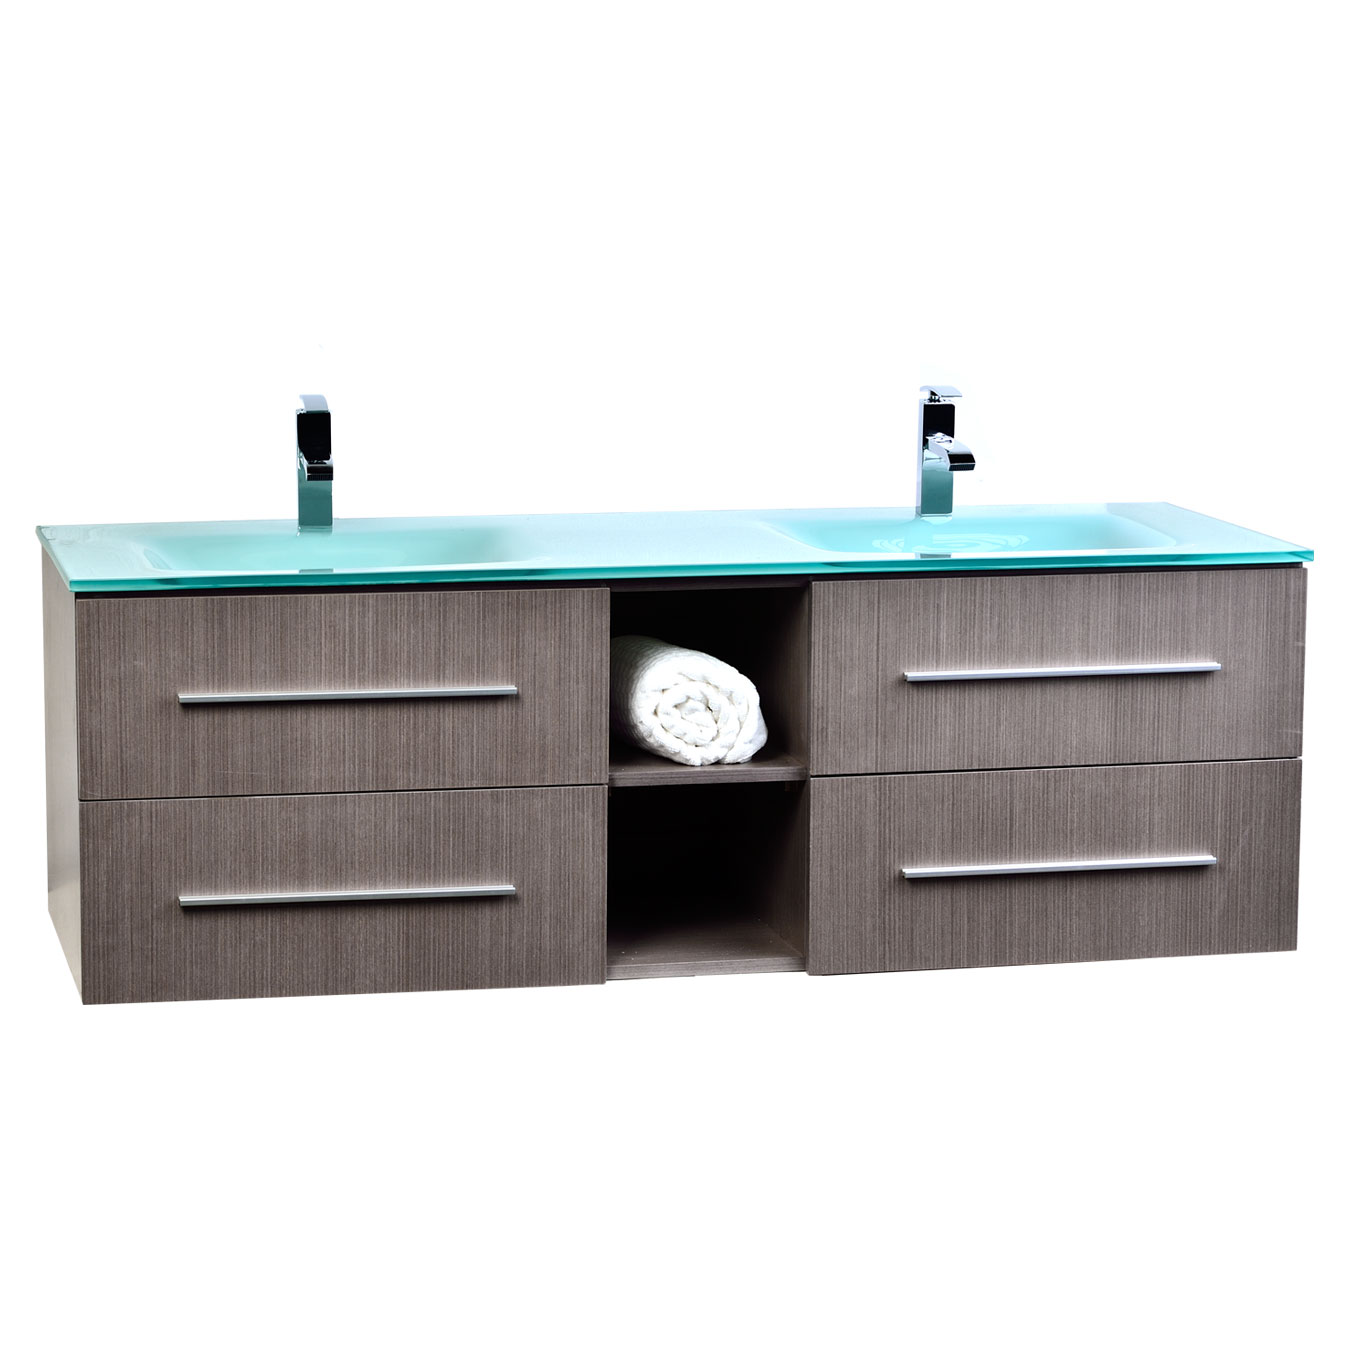 http://www.conceptbaths.com/images/detailed/1/60-inch-wall-mount-vanity.jpg